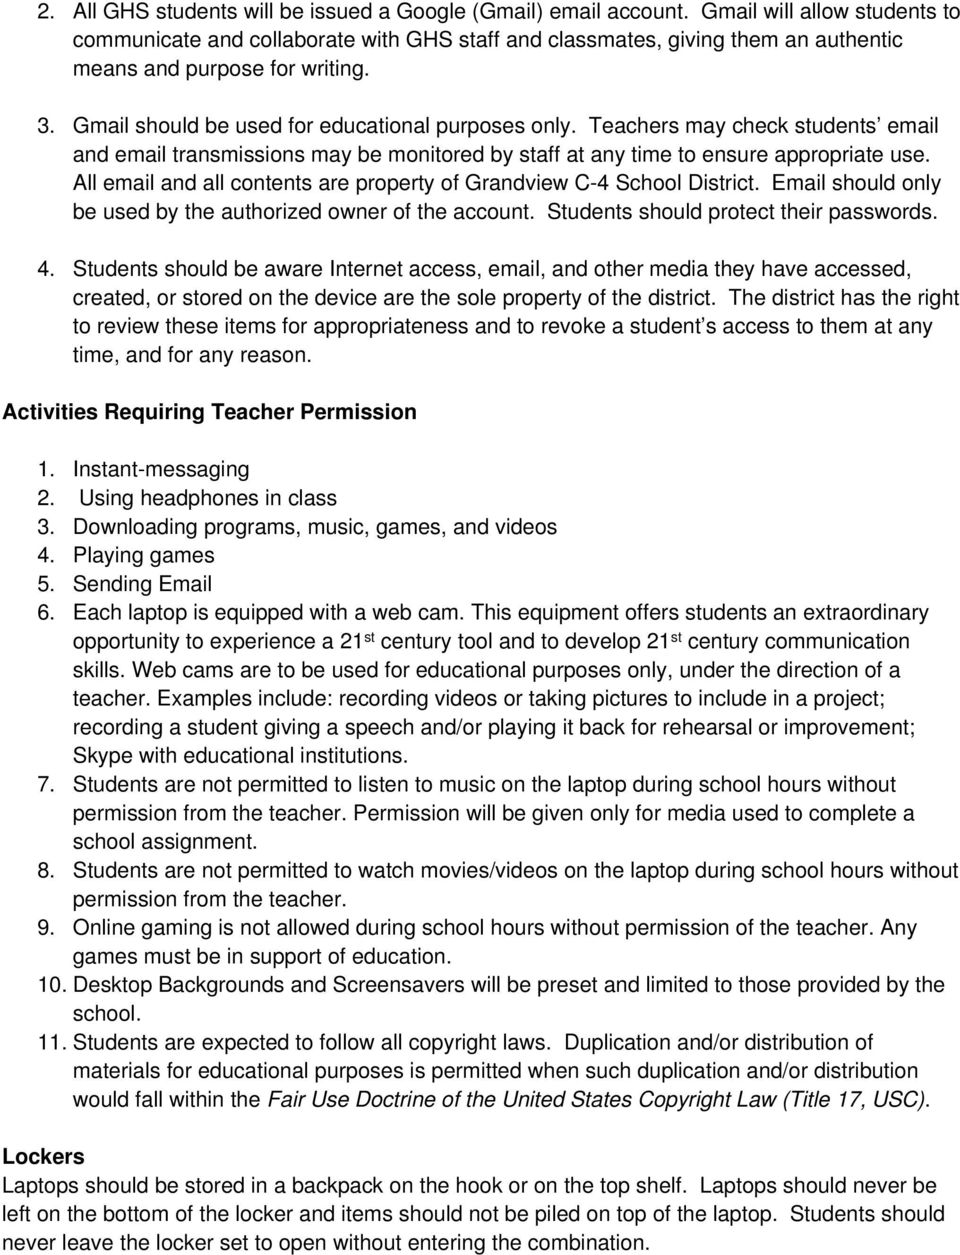 Teachers may check students email and email transmissions may be monitored by staff at any time to ensure appropriate use. All email and all contents are property of Grandview C-4 School District.